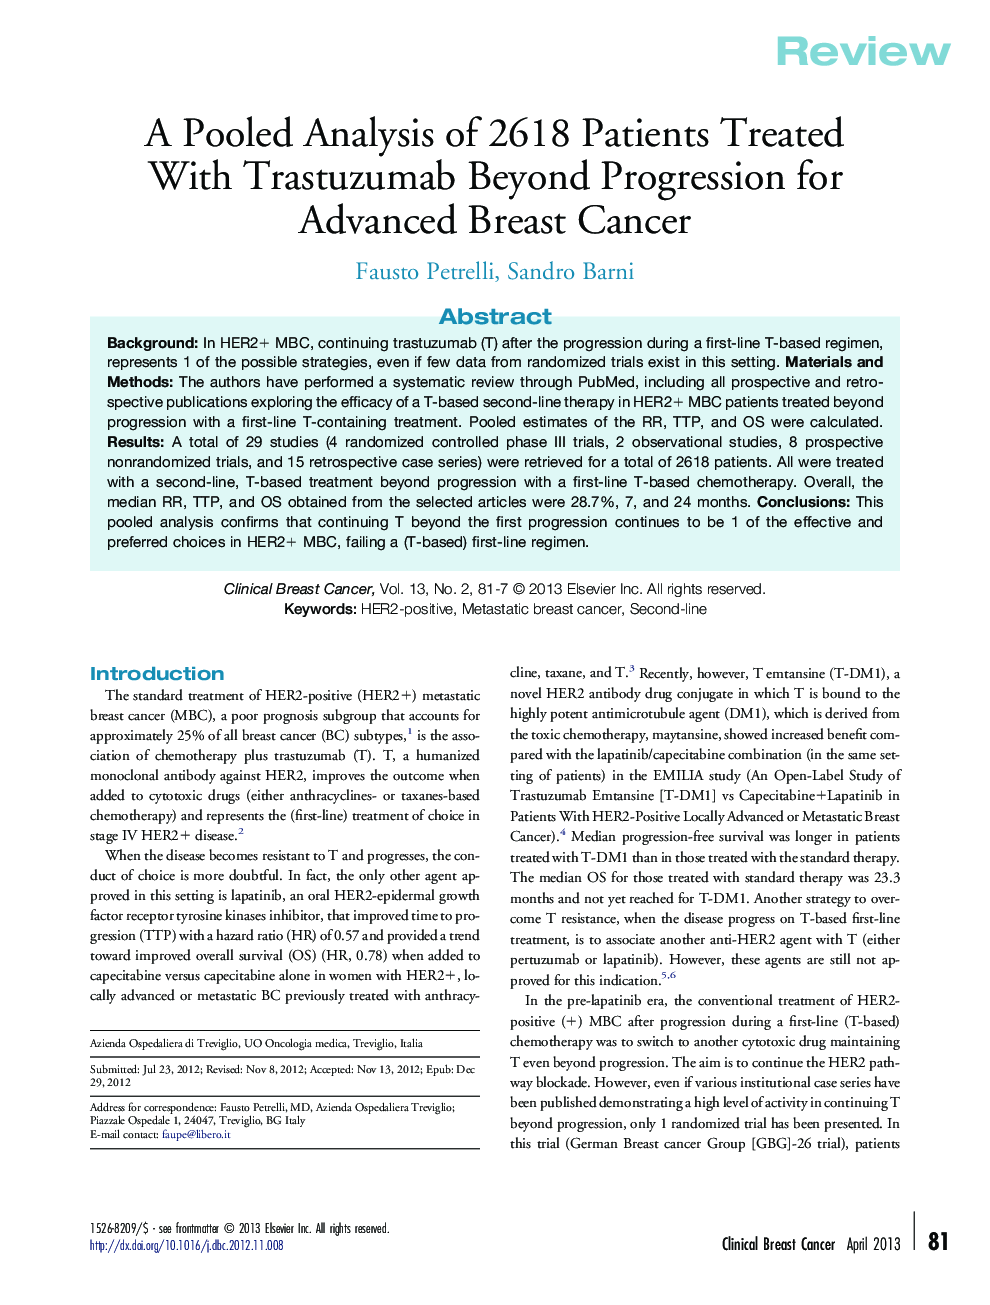 A Pooled Analysis of 2618 Patients Treated With Trastuzumab Beyond Progression for Advanced Breast Cancer